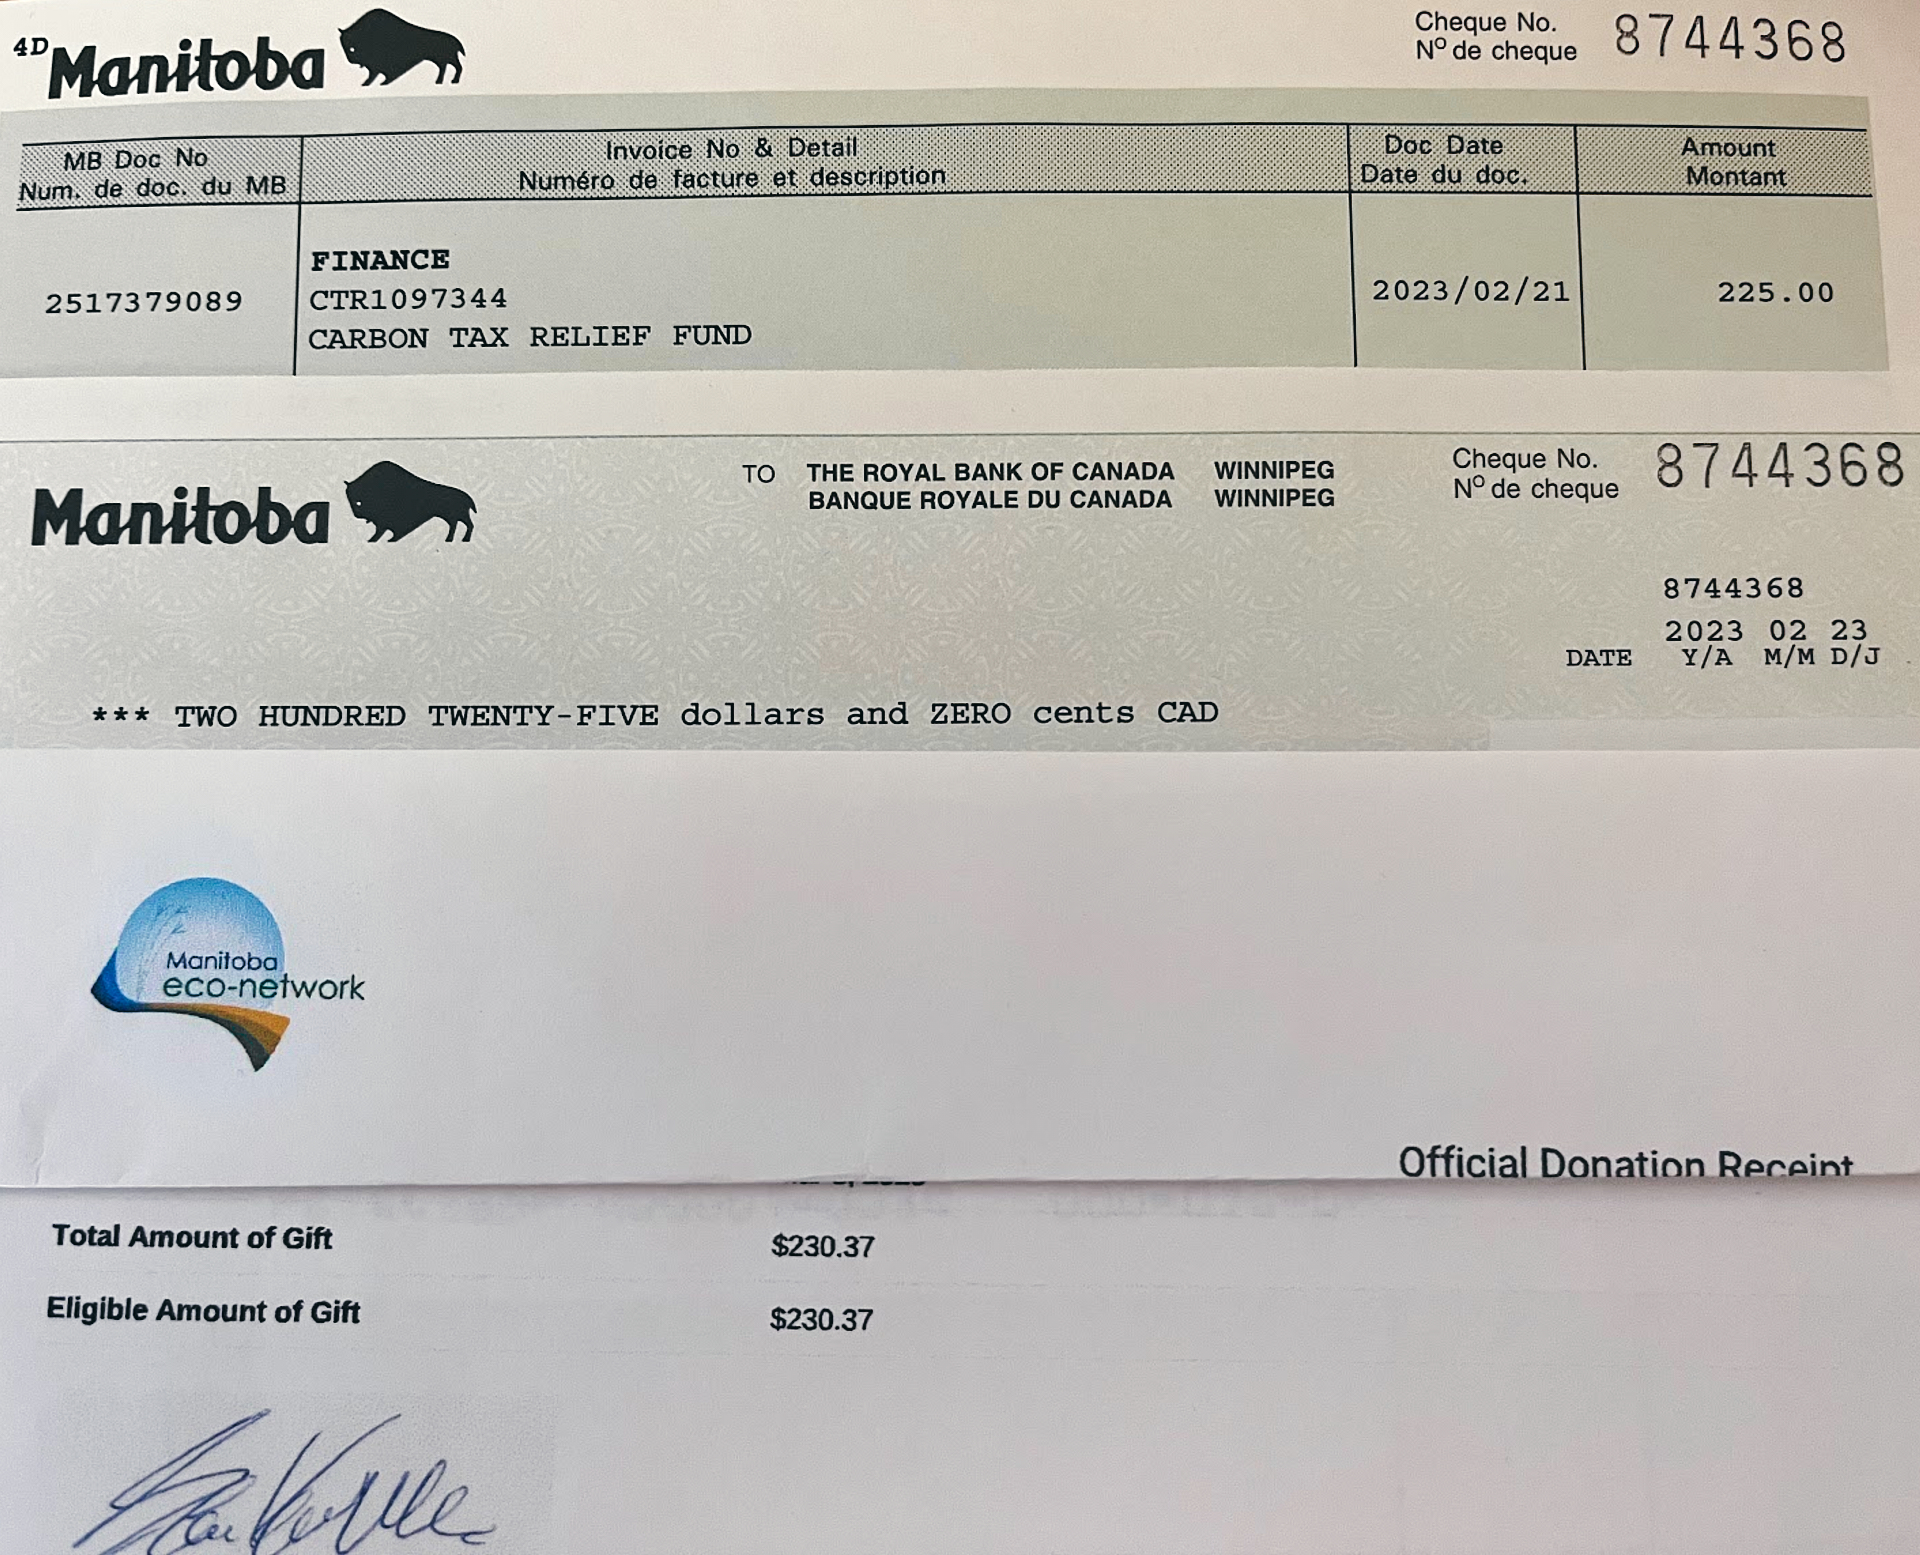 Photo image of the cheque and cheque stub for $225 for the Manitoba Carbon Tax Relief Fund accompanied with a donation receipt for $230.37 to the Manitoba Eco Network.